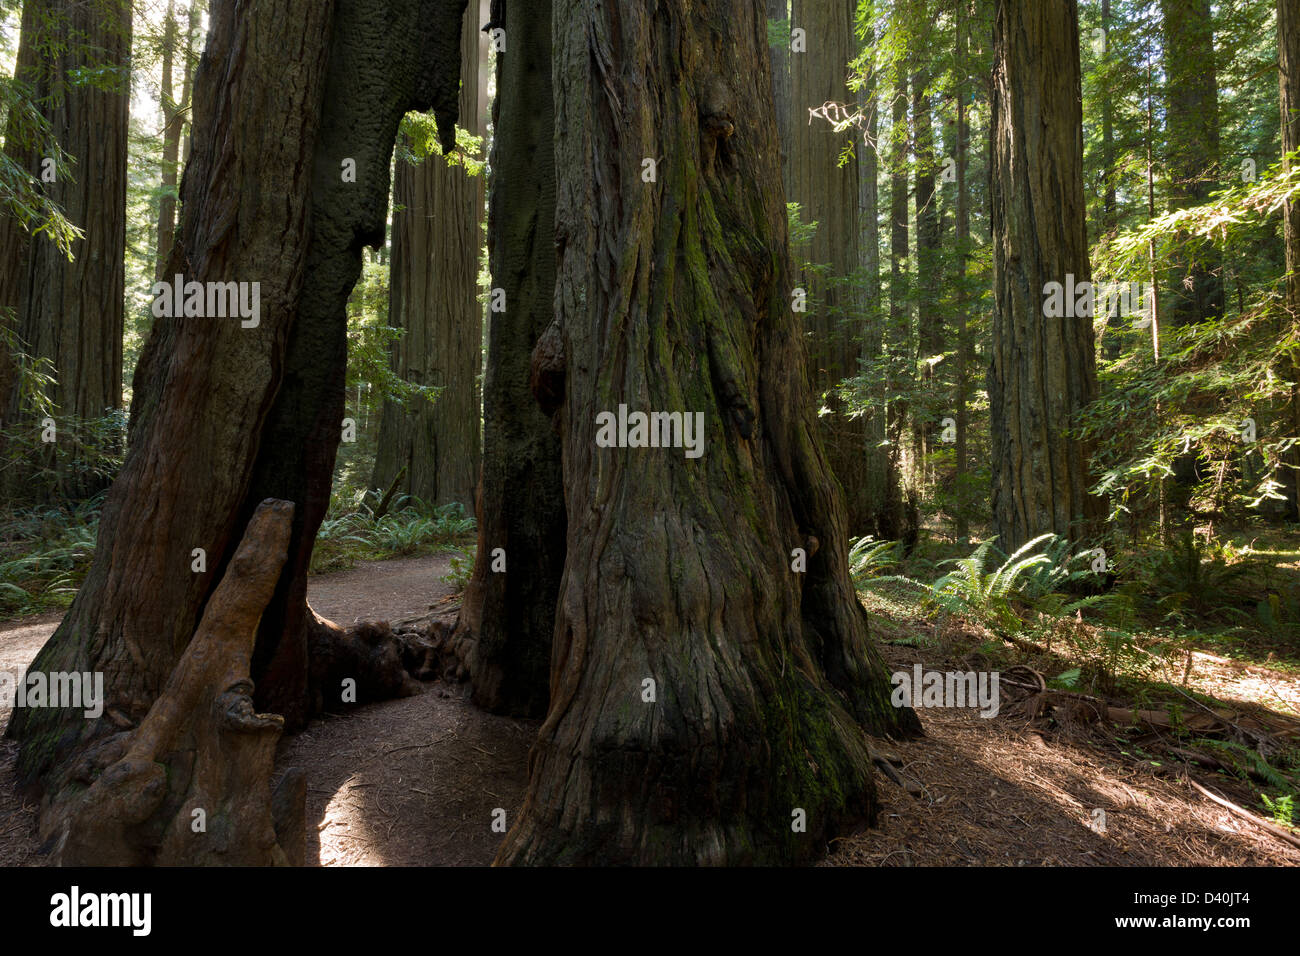 Old partially hollow Coast redwood (Sequoia sempervirens) in Founders Grove, Humboldt Redwoods State Park, California, USA Stock Photo